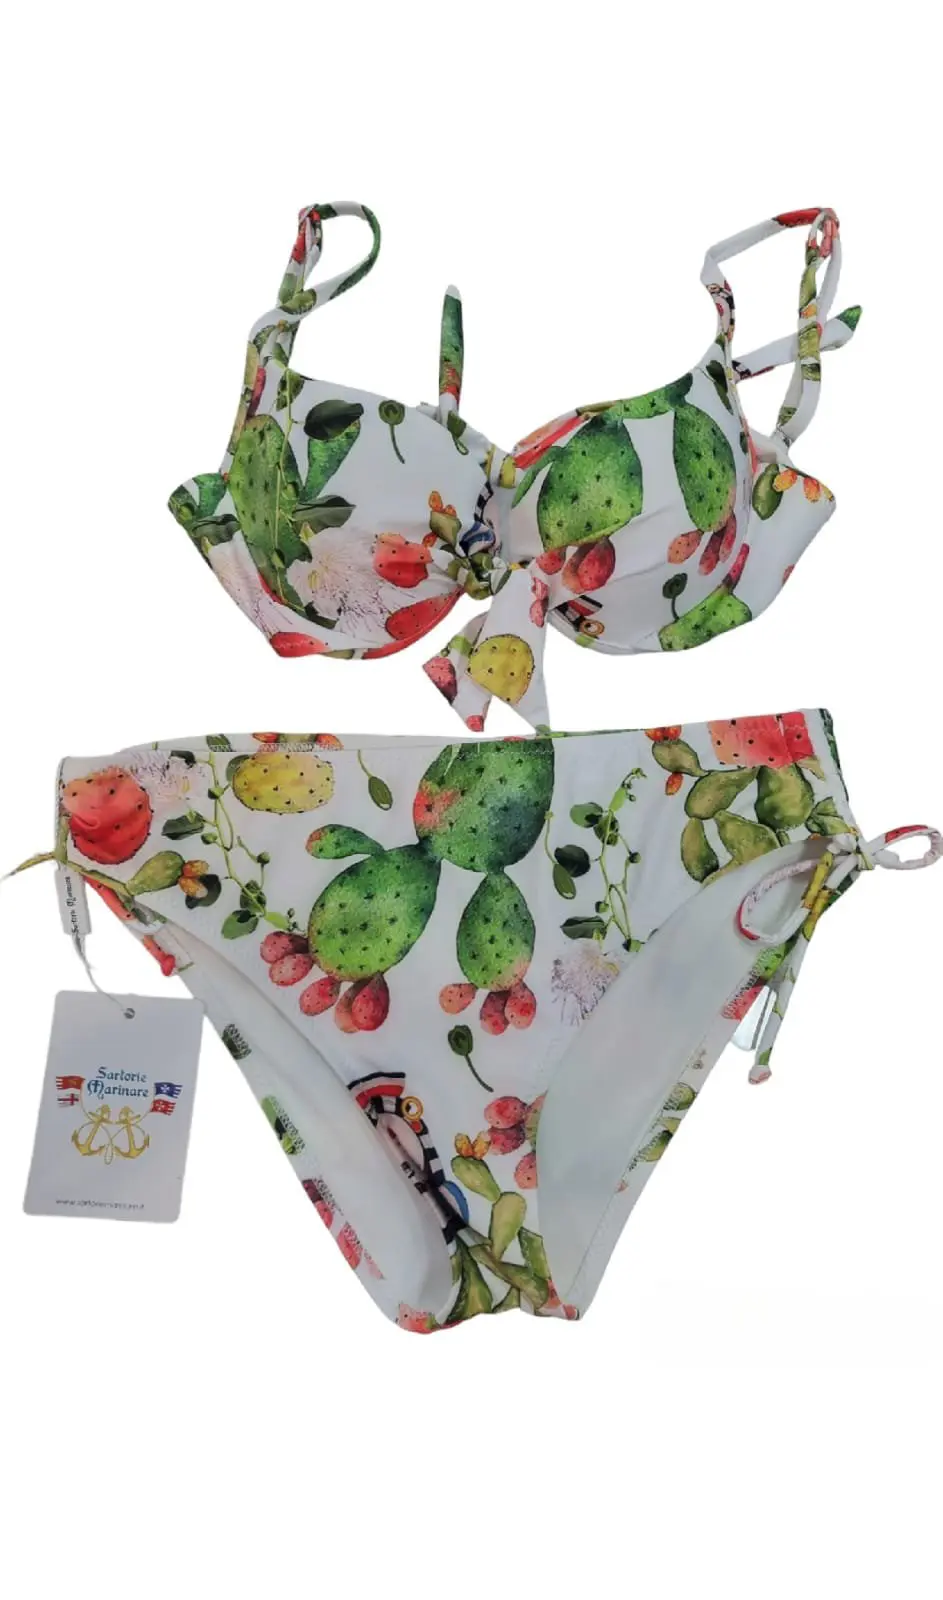 Bikini with cactus bow and dark brown heads, cut-out briefs. Adjustable straps